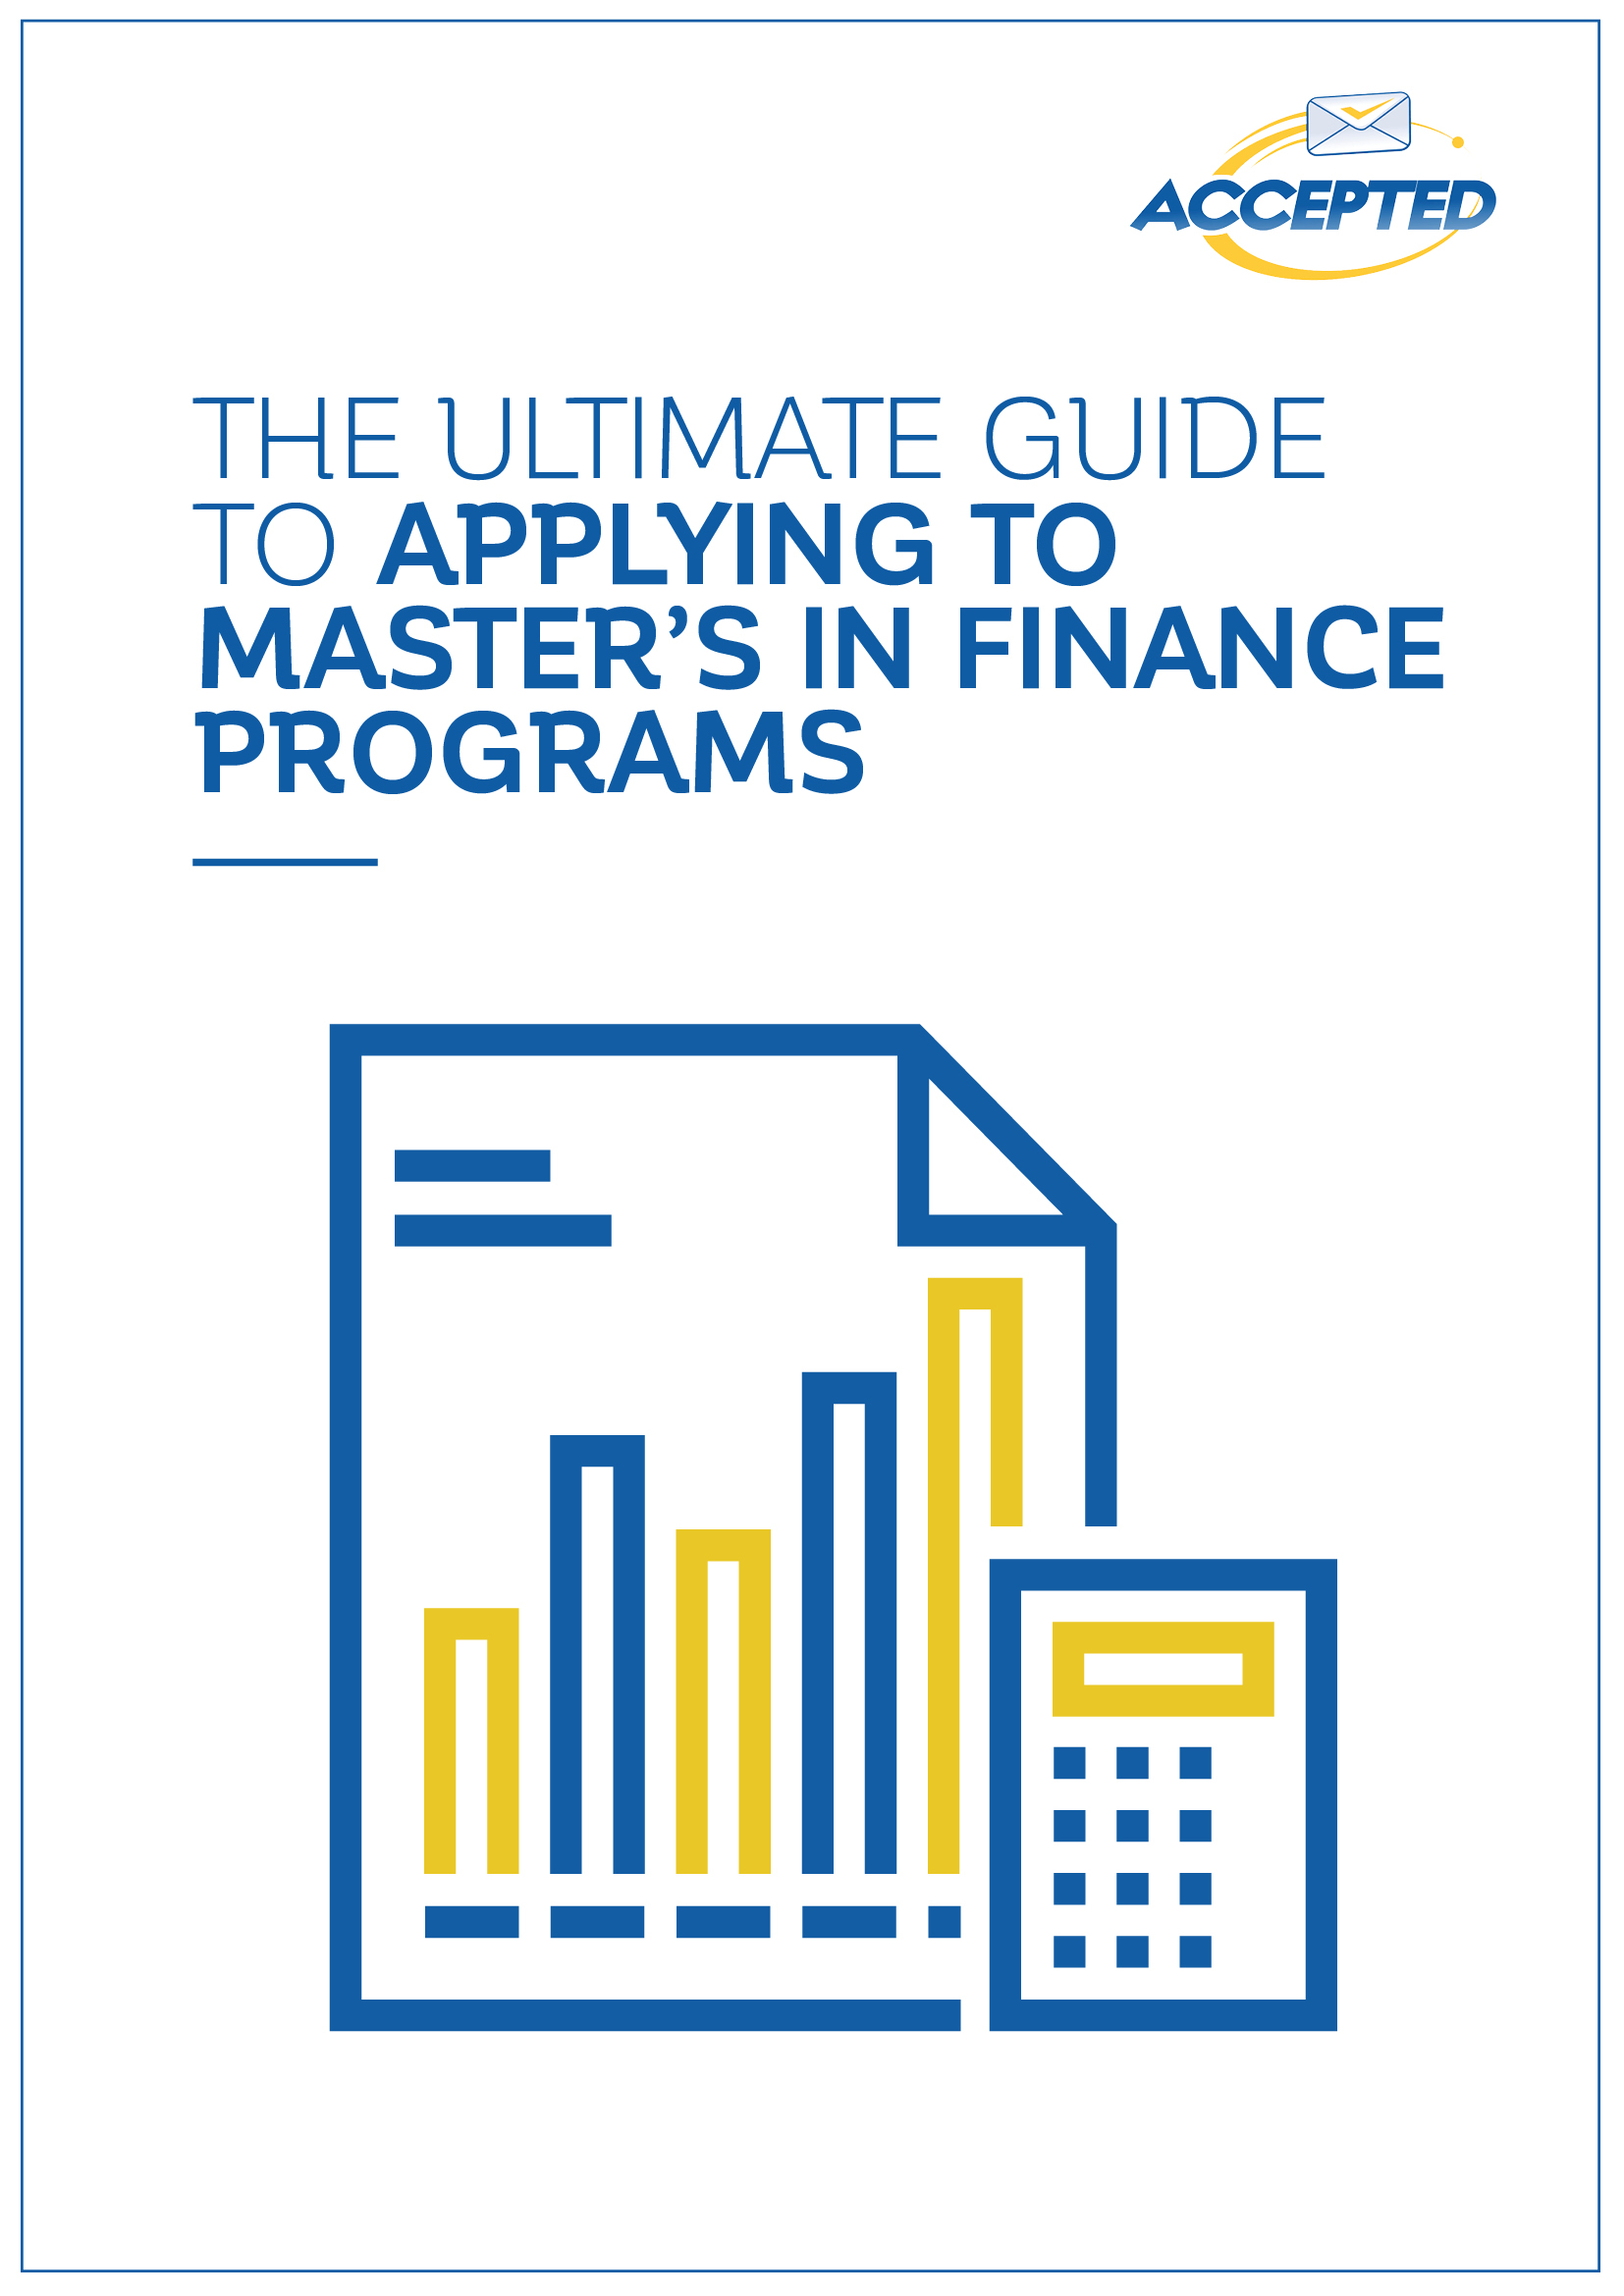 The Ultimate Guide to Applying to Master's in Finance Programs